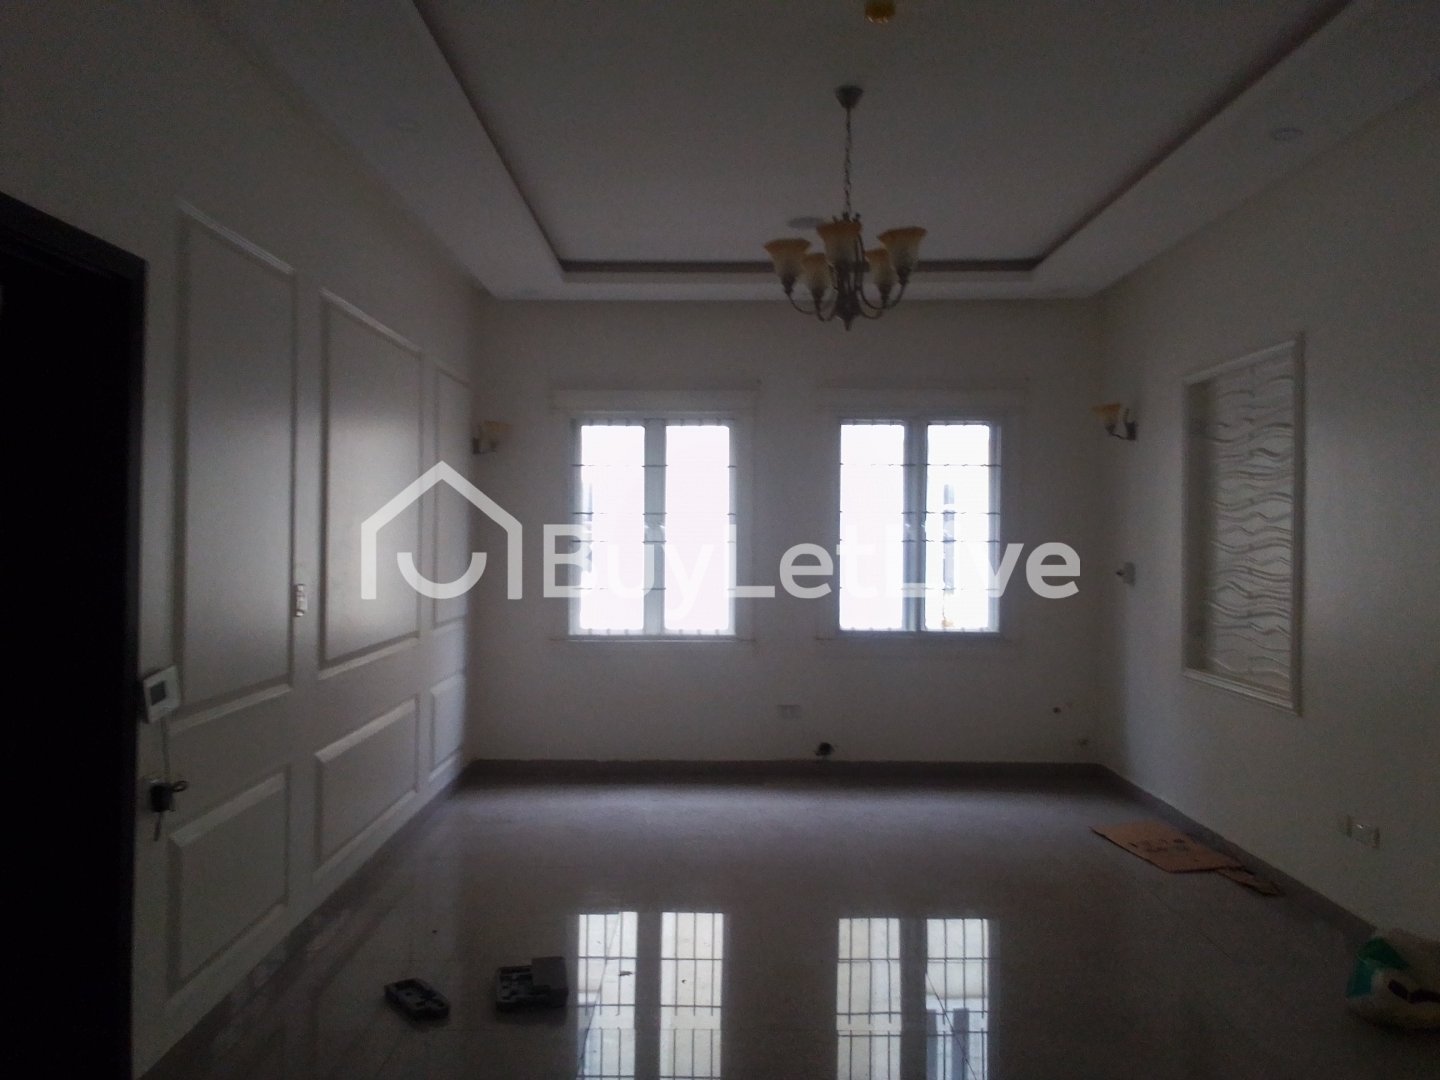 5 bedrooms Detached Duplex with 2Rooms Bq for lease at chevron